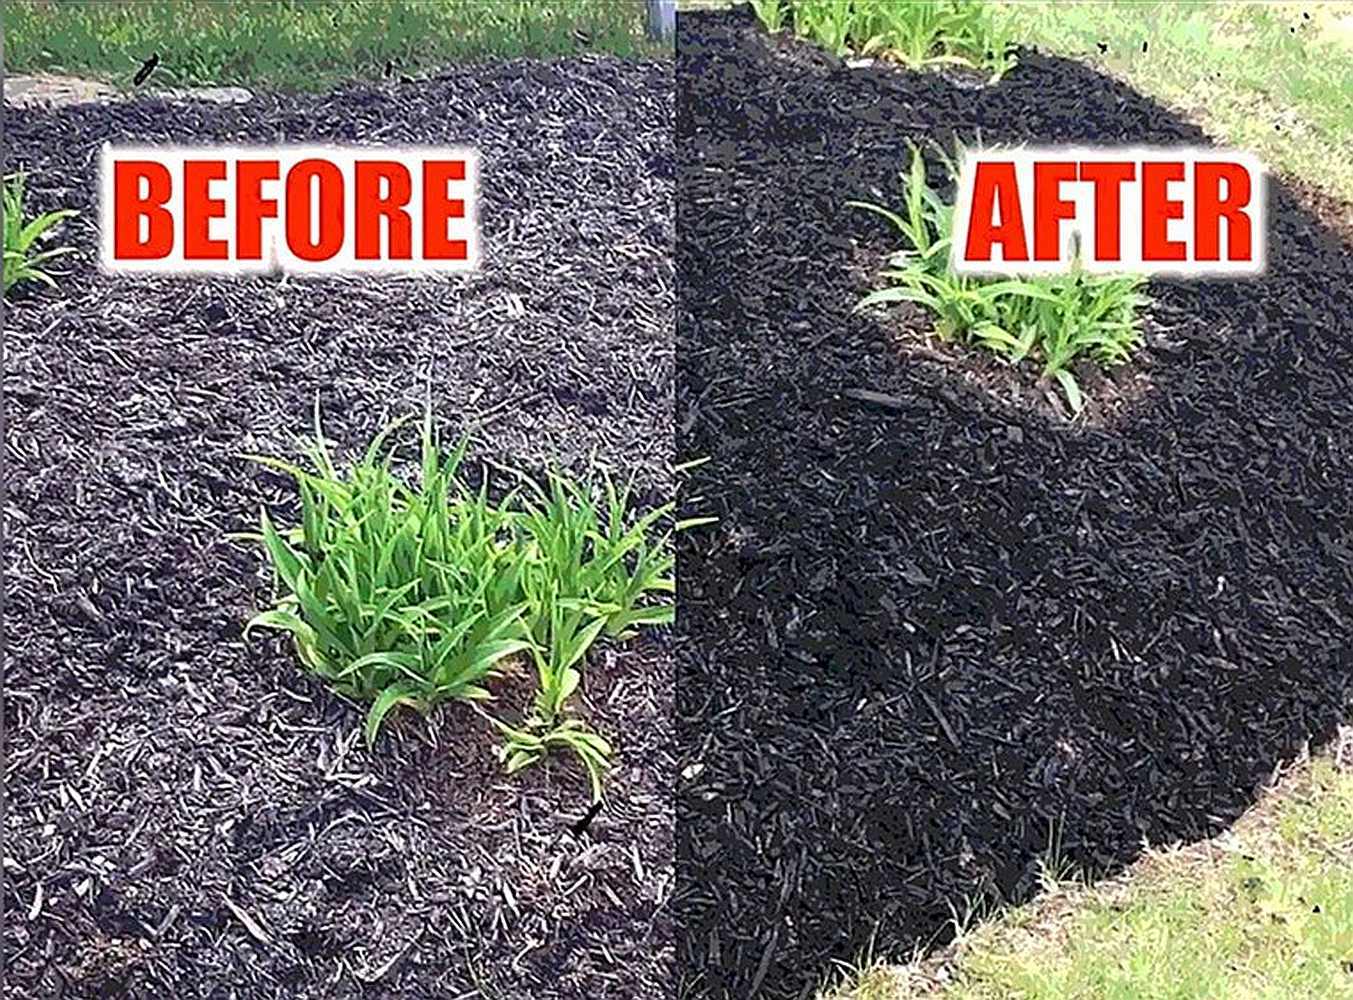 The black mulch dye from @petramax is amazing! I highly recommend it t